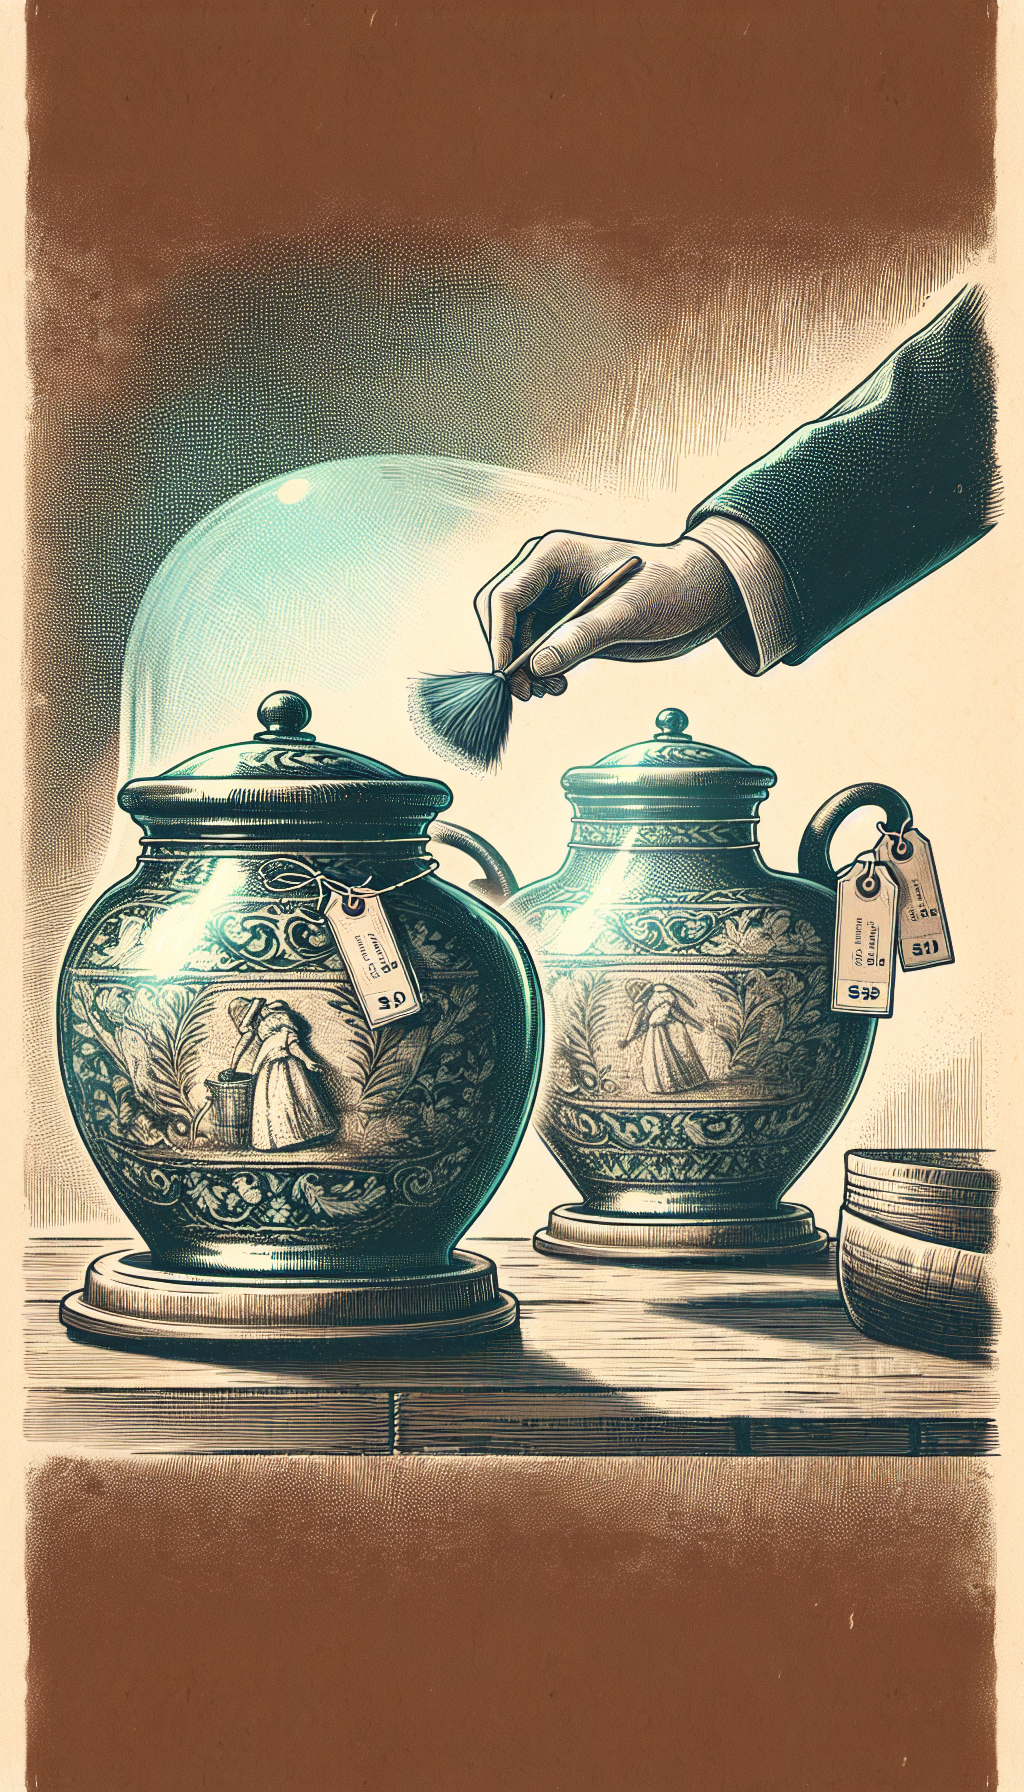 An illustration displays a pair of pristine antique crocks on a pedestal, enshrined under a glass dome. A soft beam of light highlights their glaze and heritage marks. A gentle hand dusts one with a feather duster, symbolizing careful maintenance, while tags dangle off the handles showing increasing dollar values, echoing their preserved worth. The image blends a vintage etching style with vibrant, modern color accents.